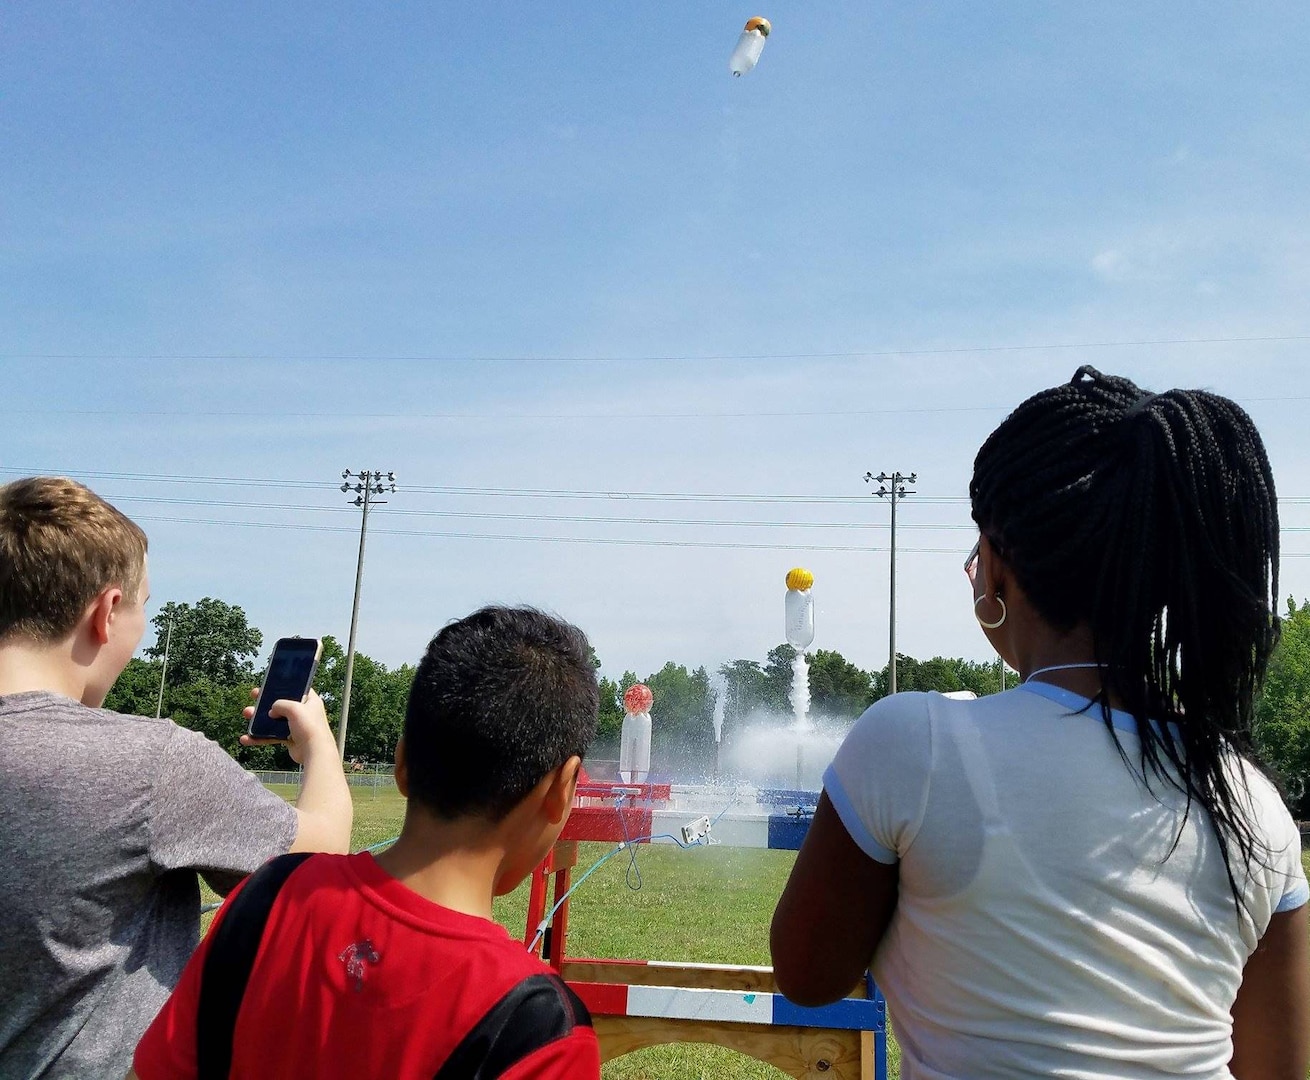 KING GEORGE. Va. (June 29, 2017) - Middle school students fire water rockets they built with fuel load to maximize height at the 2017 Naval Surface Warfare Center Dahlgren Division sponsored STEM Summer Academy, held June 26-30. Camp activities also included ten robotic challenges; exploring epidemiology; building and destructively testing a tower from balsa wood with the goal of maximizing the strength to weight ratio; predicting the number of each color of M&Ms in a large bag after compiling statistics on numbers in smaller bags; and building a boat out of foil and straws with the aim of maximizing its cargo carrying capacity.